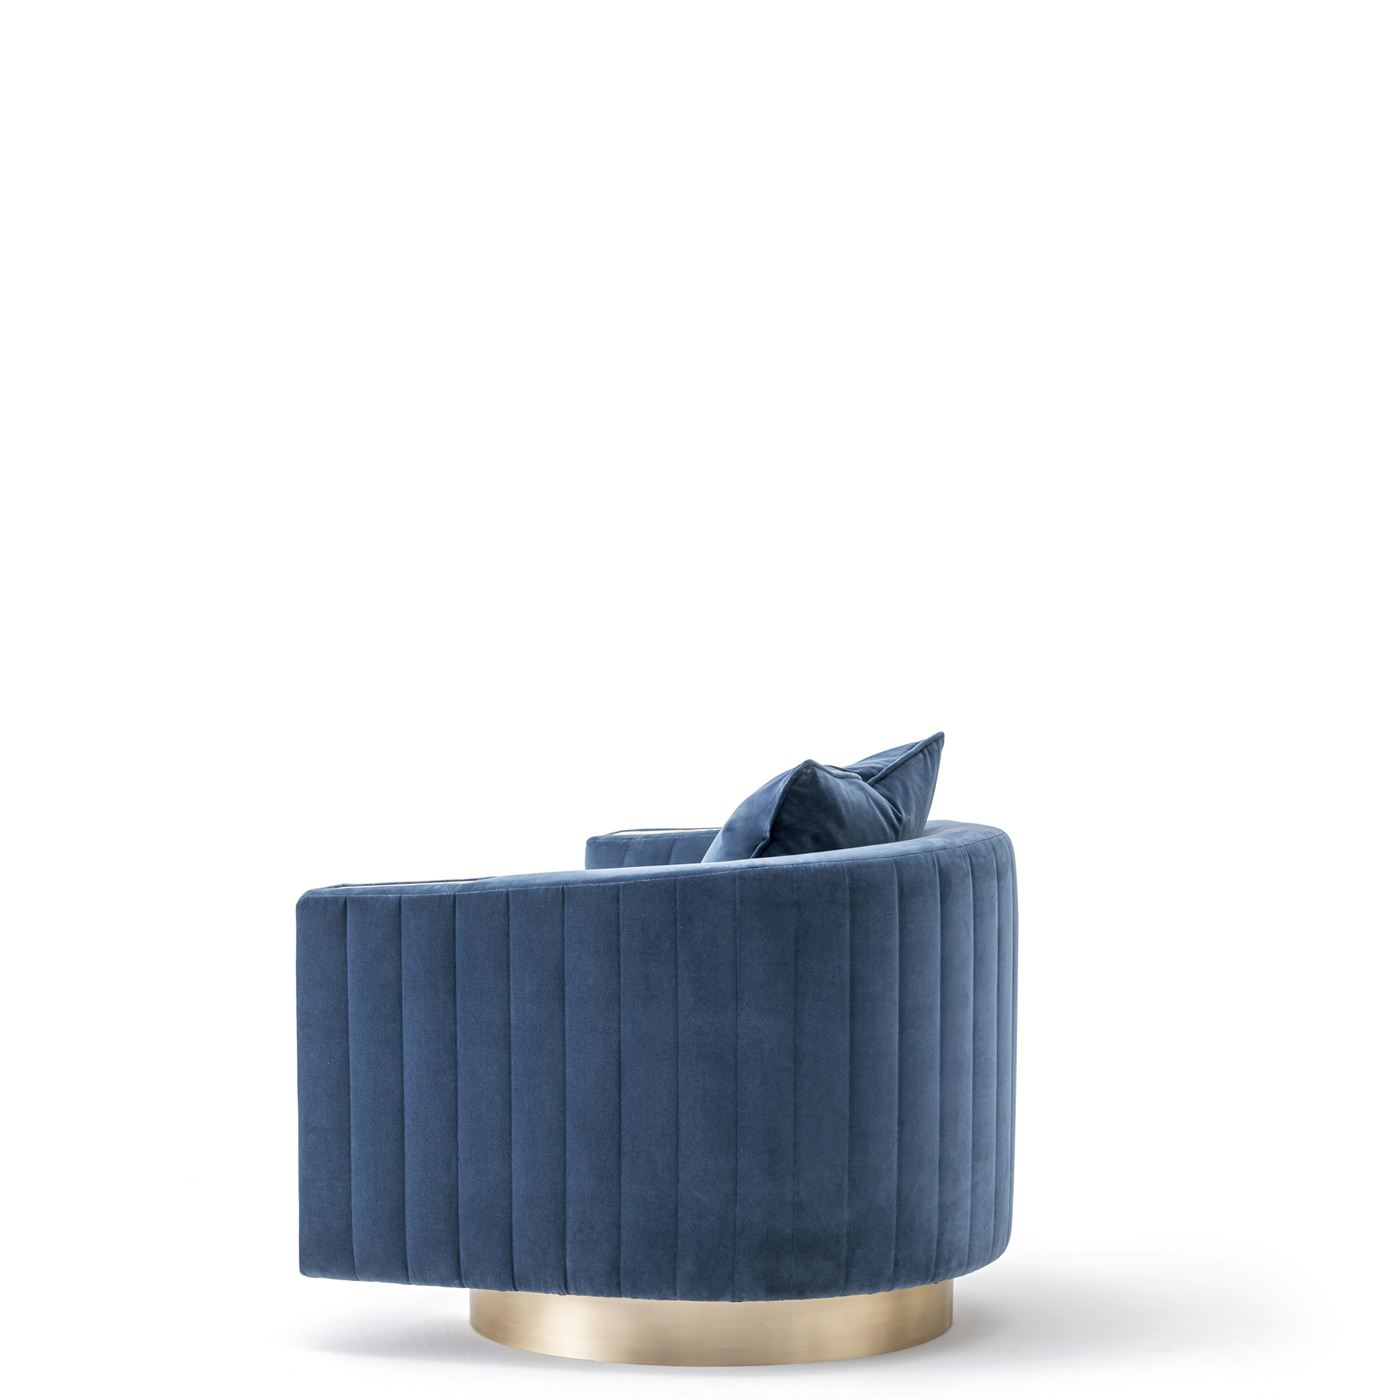 Sofas and seats - Rachele armchair with details in horn 6040 - Arcahorn